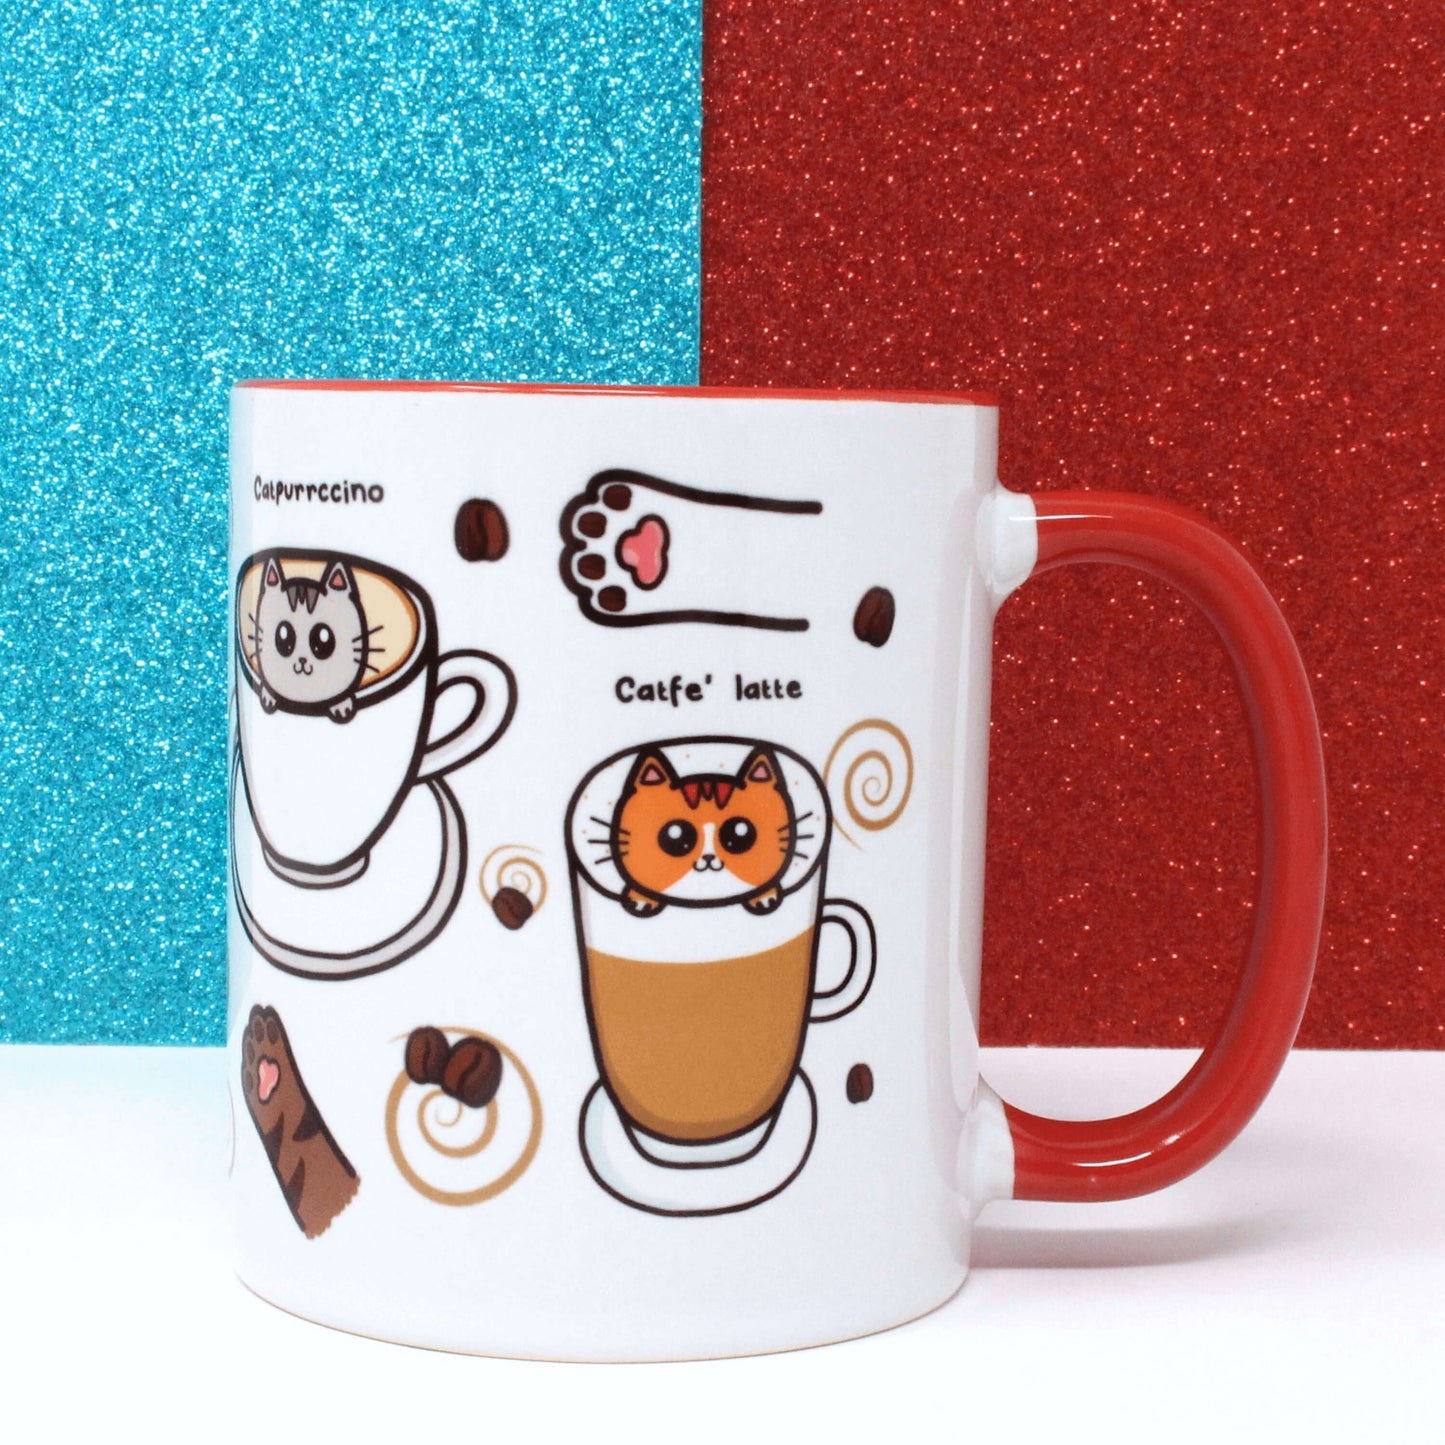 The Coffee Mog Cat Mug on a white table with a red and blue glitter background. The cat themed white coffee mug with red inner and handle is facing left to show illustrations of cat paw toe coffee beans, catpurrccino (a grey cat in a cappuccino), catfe' latte (an orange cat in a latte) with coffee beans and brown swirls.